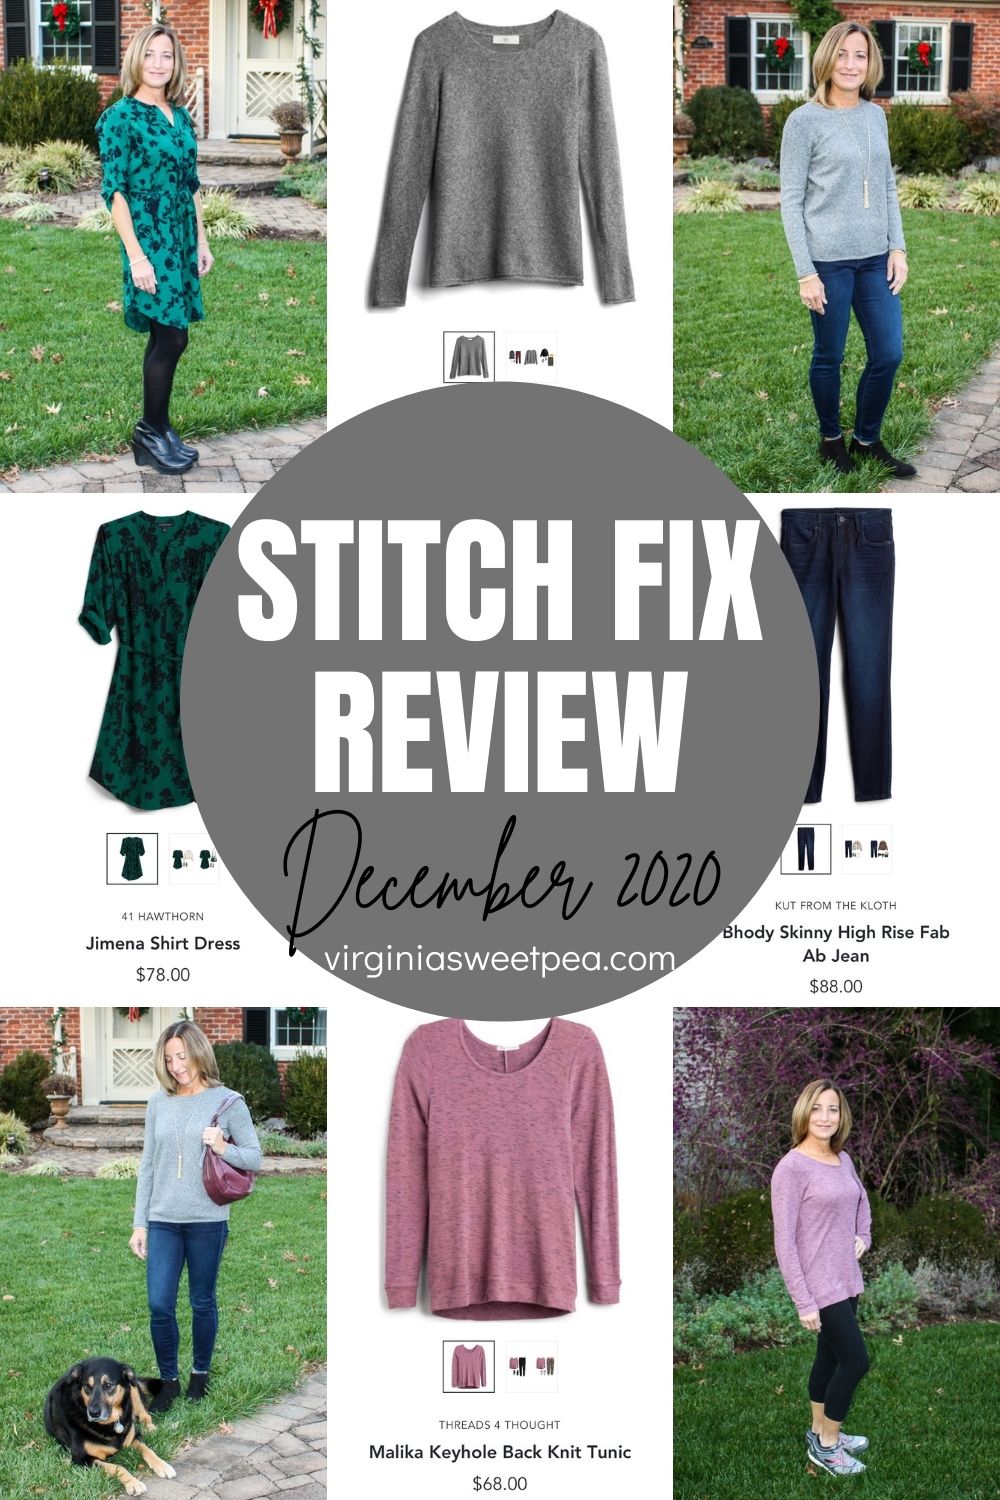 Stitch Fix Review for December 2020